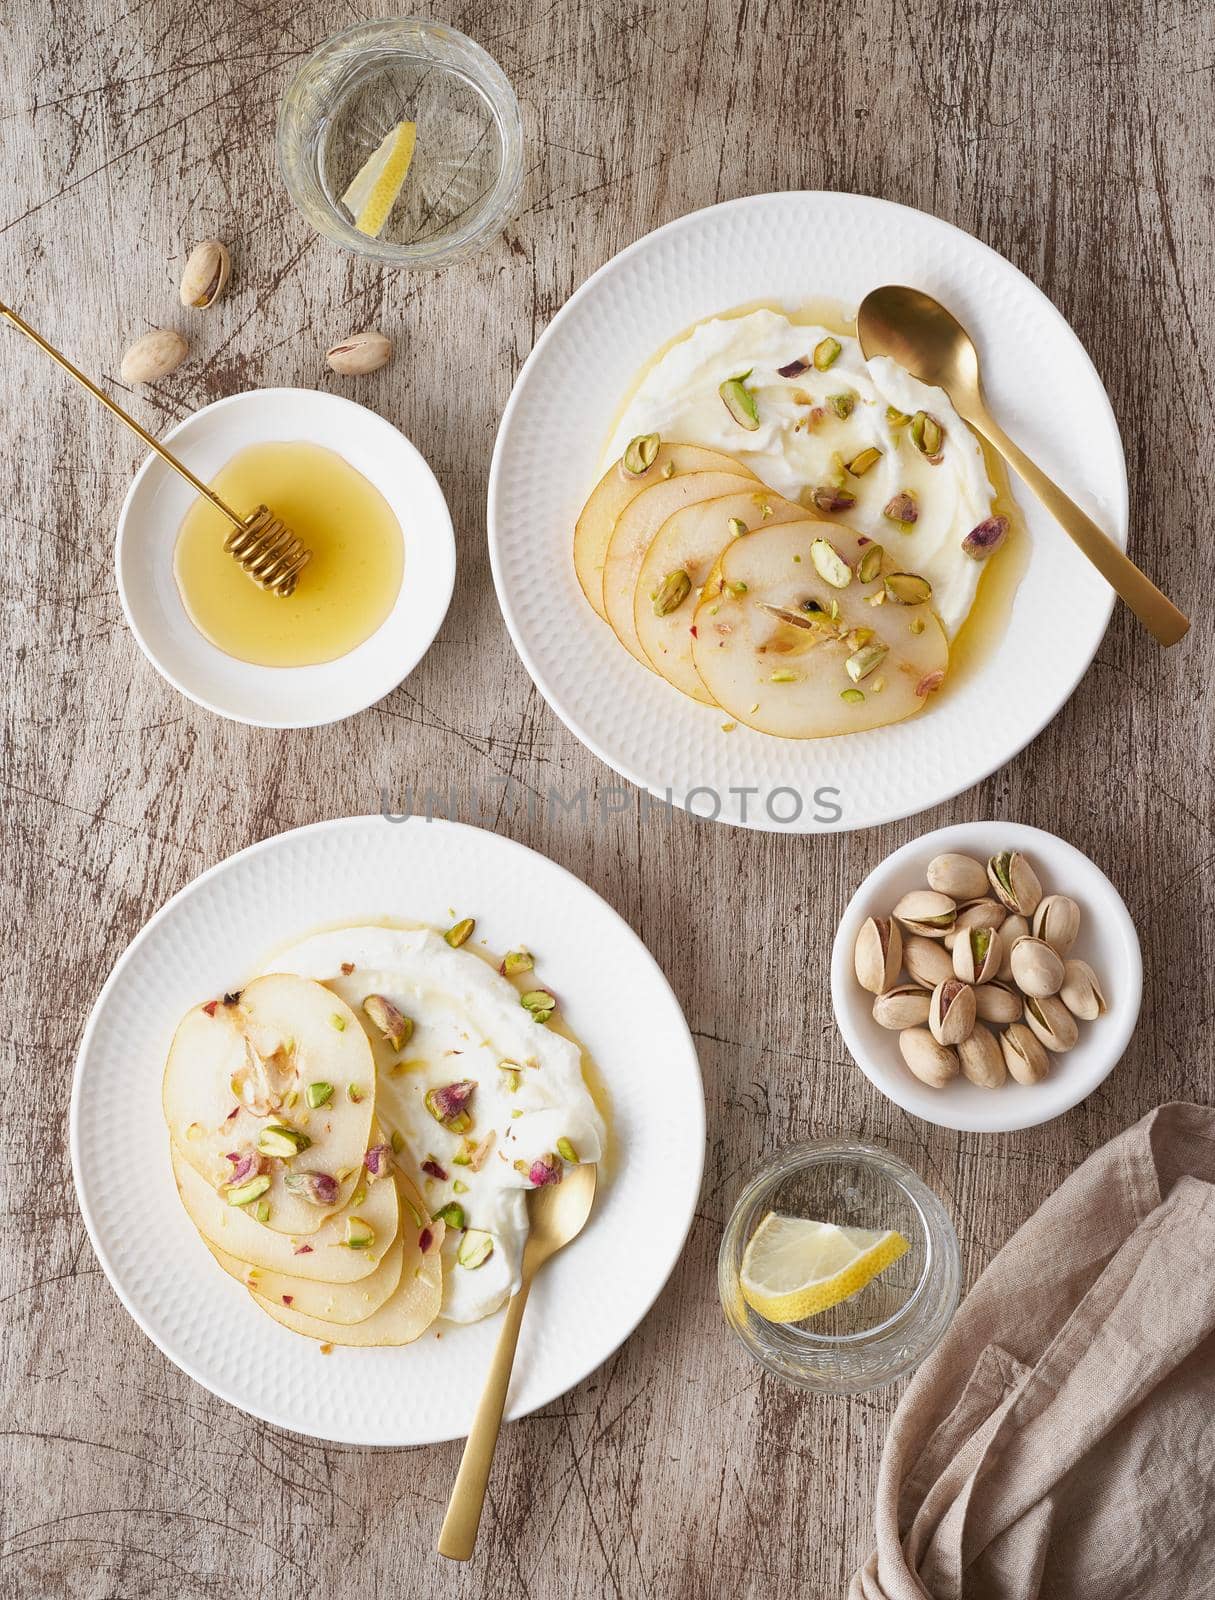 Ricotta with pears, pistachios and honey or maple syrup on two white plate by NataBene